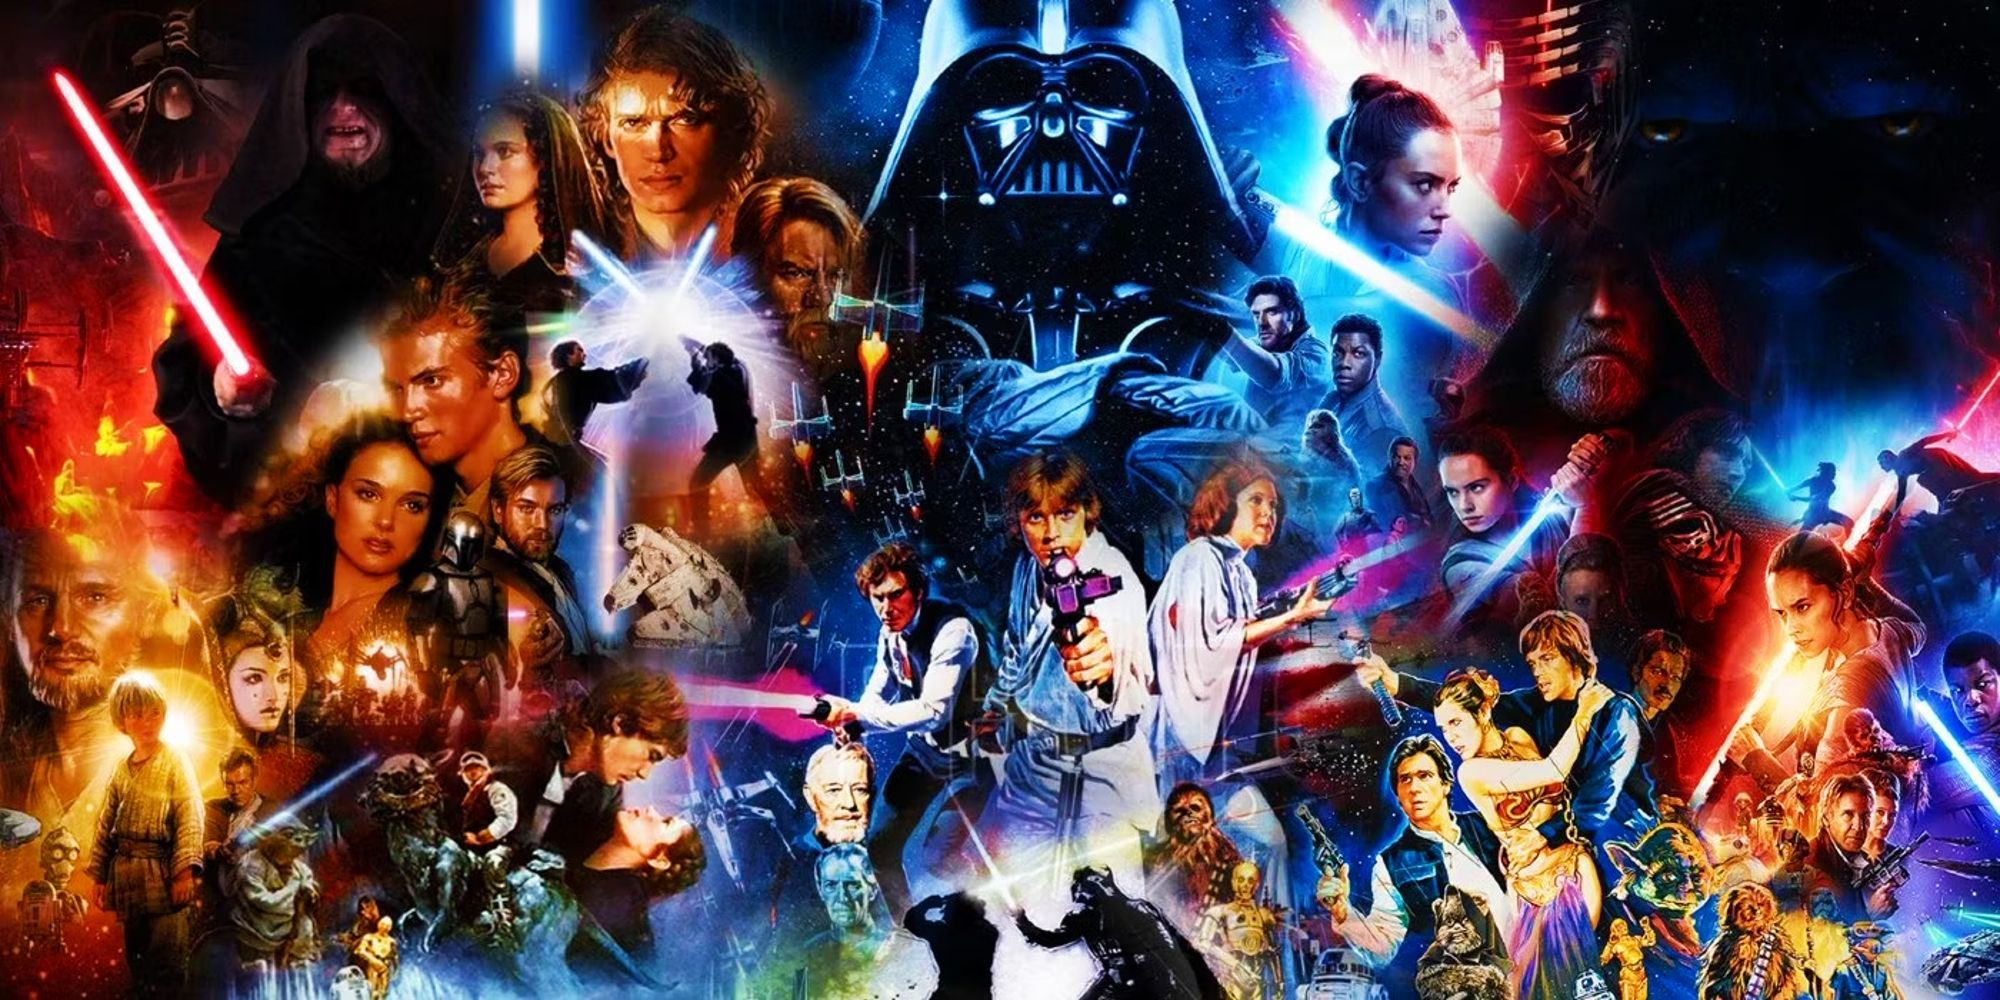 A combined poster of the Skywalker Saga